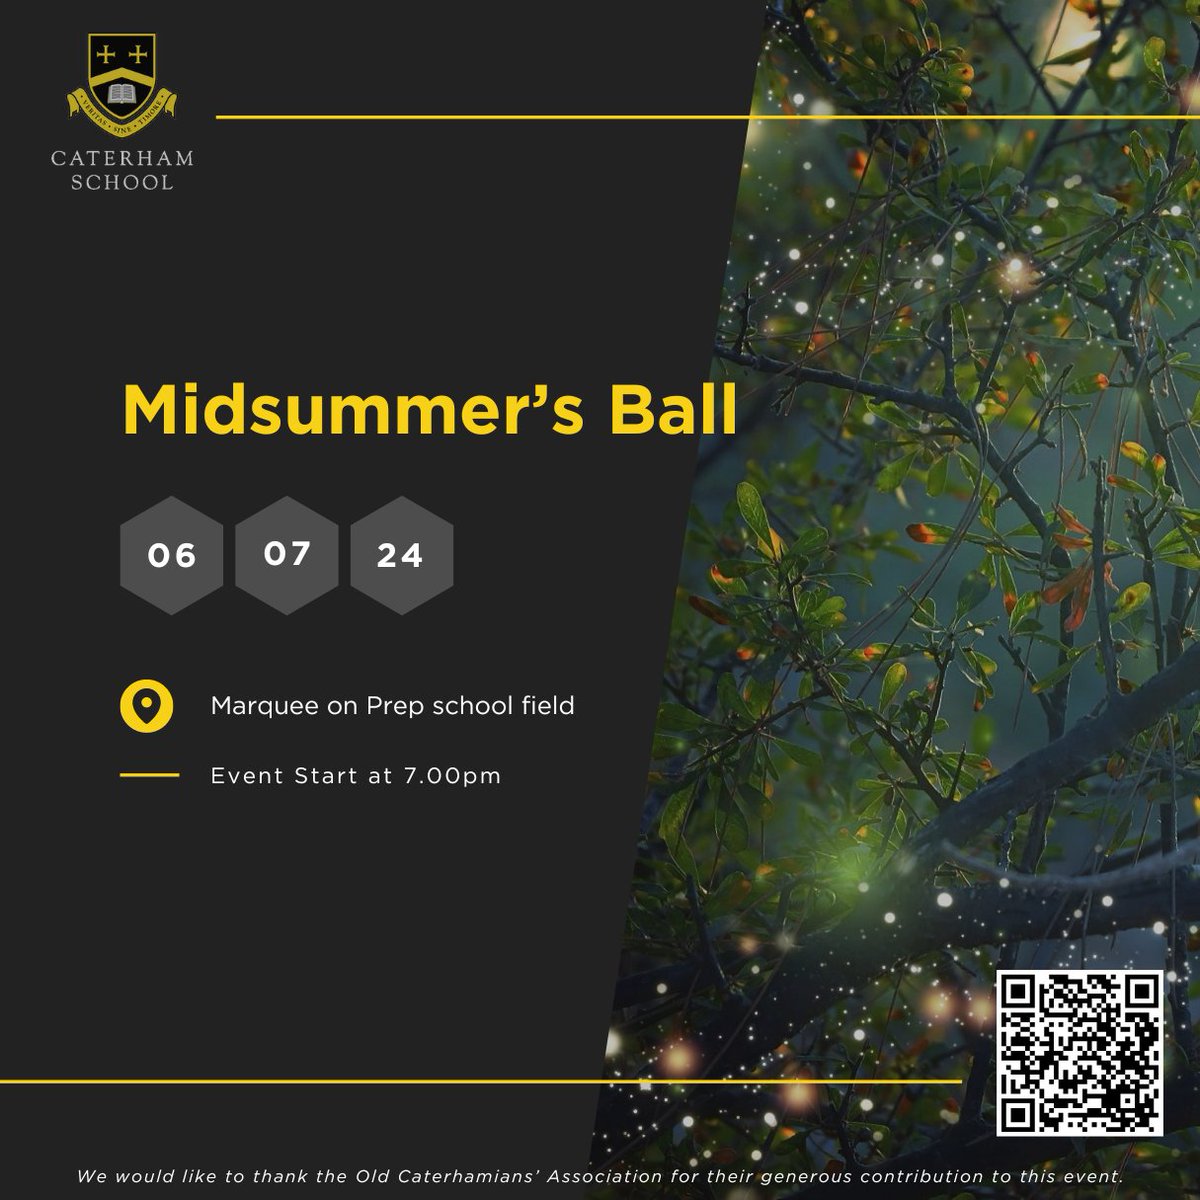 Hurry, the early bird catches the savings! Only TWO weeks left to secure your early bird tickets for The Midsummer's Ball! Don't miss out on the chance to secure your spot at a discounted rate. Act fast and reserve your tickets now before prices go up!